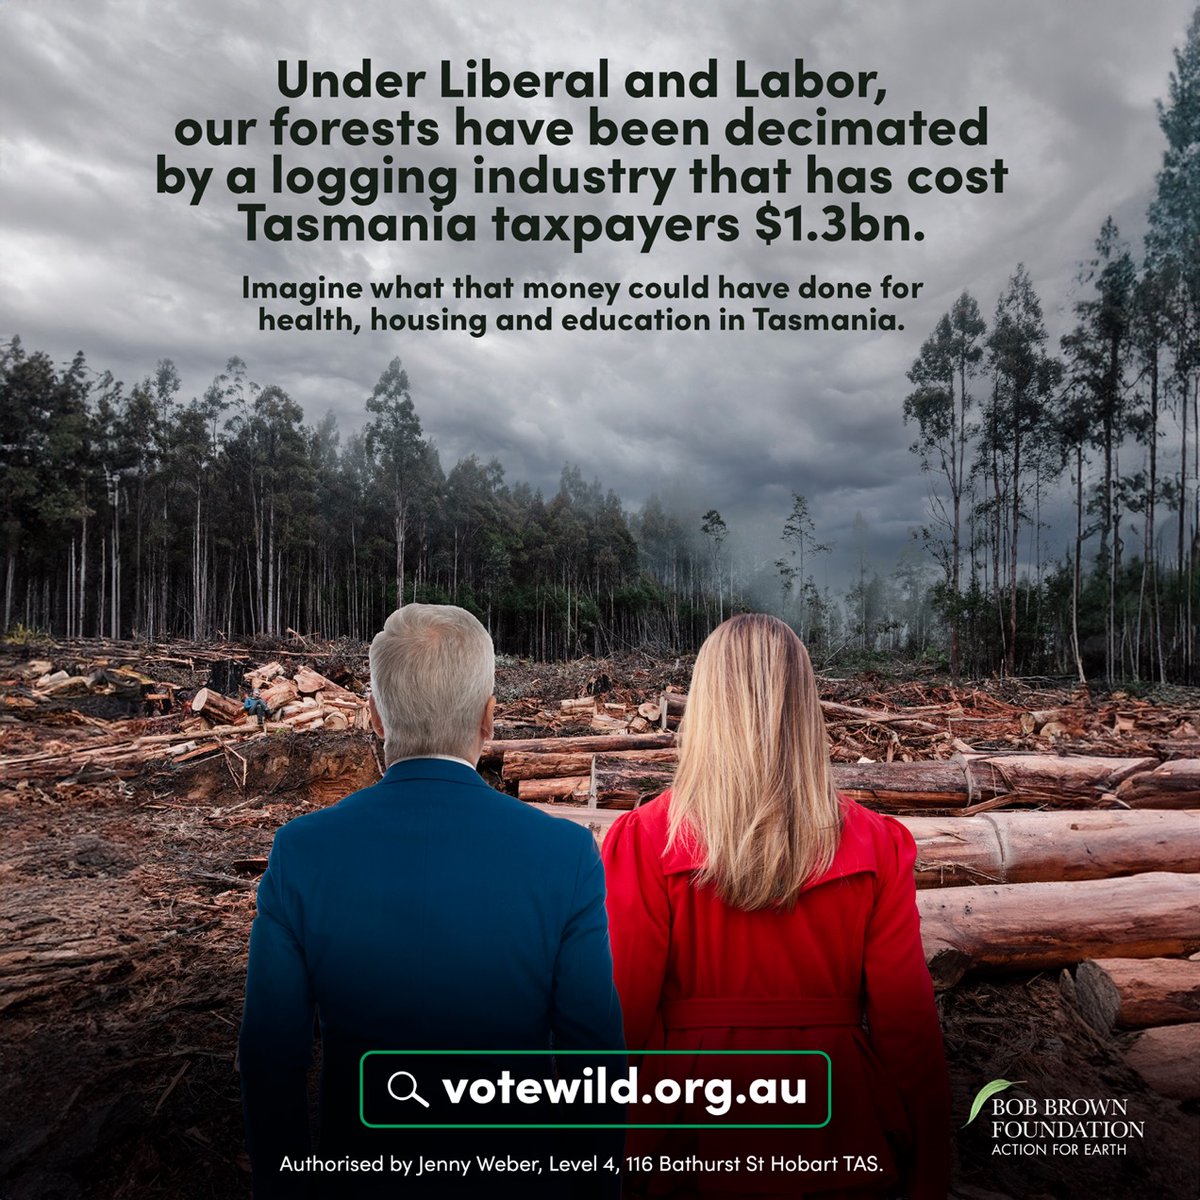 Native forest logging in Tasmania is propped up by massive government subsidies which means 𝙮𝙤𝙪 are paying for this destruction. Instead, these much-needed funds should be spent on health, housing and education. #EndNativeForestLogging votewild.org.au #Politas